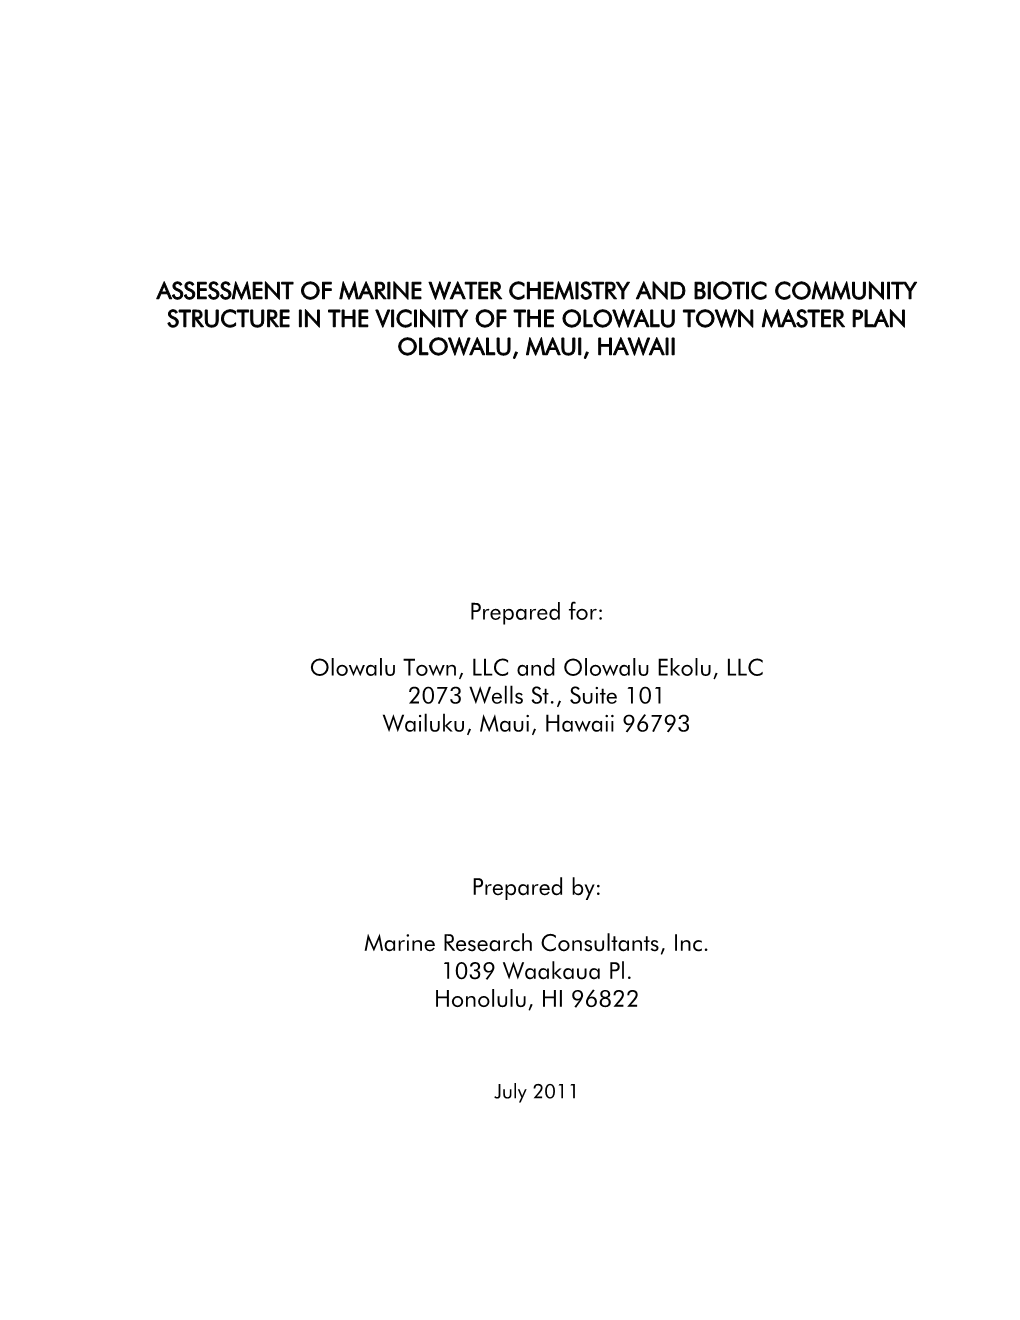 Assessment of Marine Water Chemistry and Biotic Community Structure in the Vicinity of the Olowalu Town Master Plan Olowalu, Maui, Hawaii